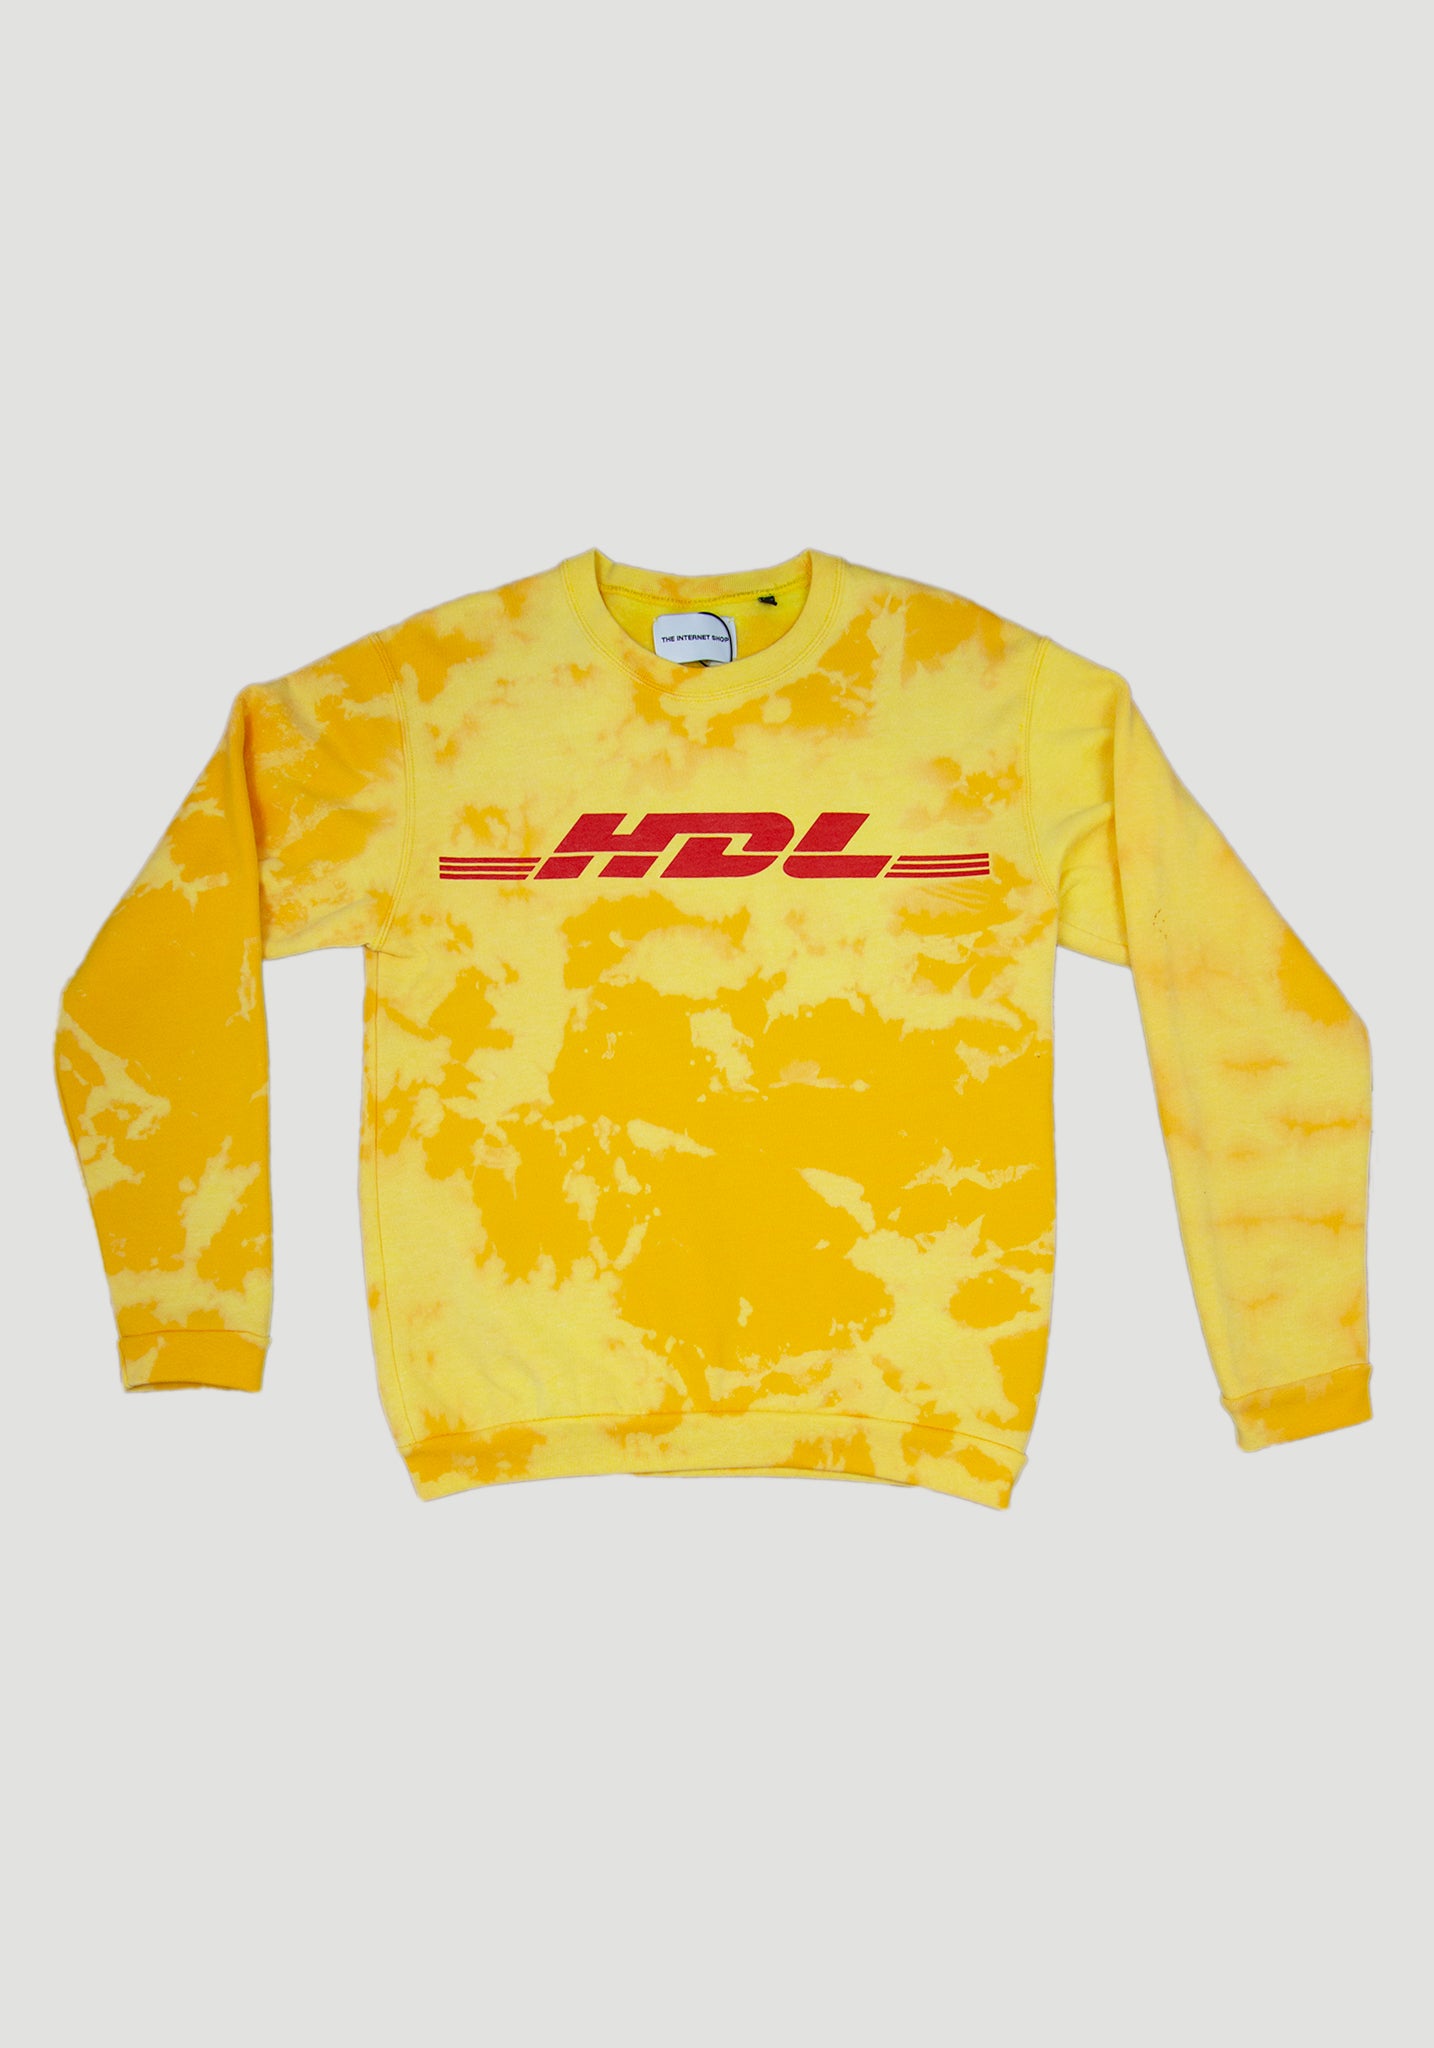 HDL Sweater Sunkissed Edition #07 (S)